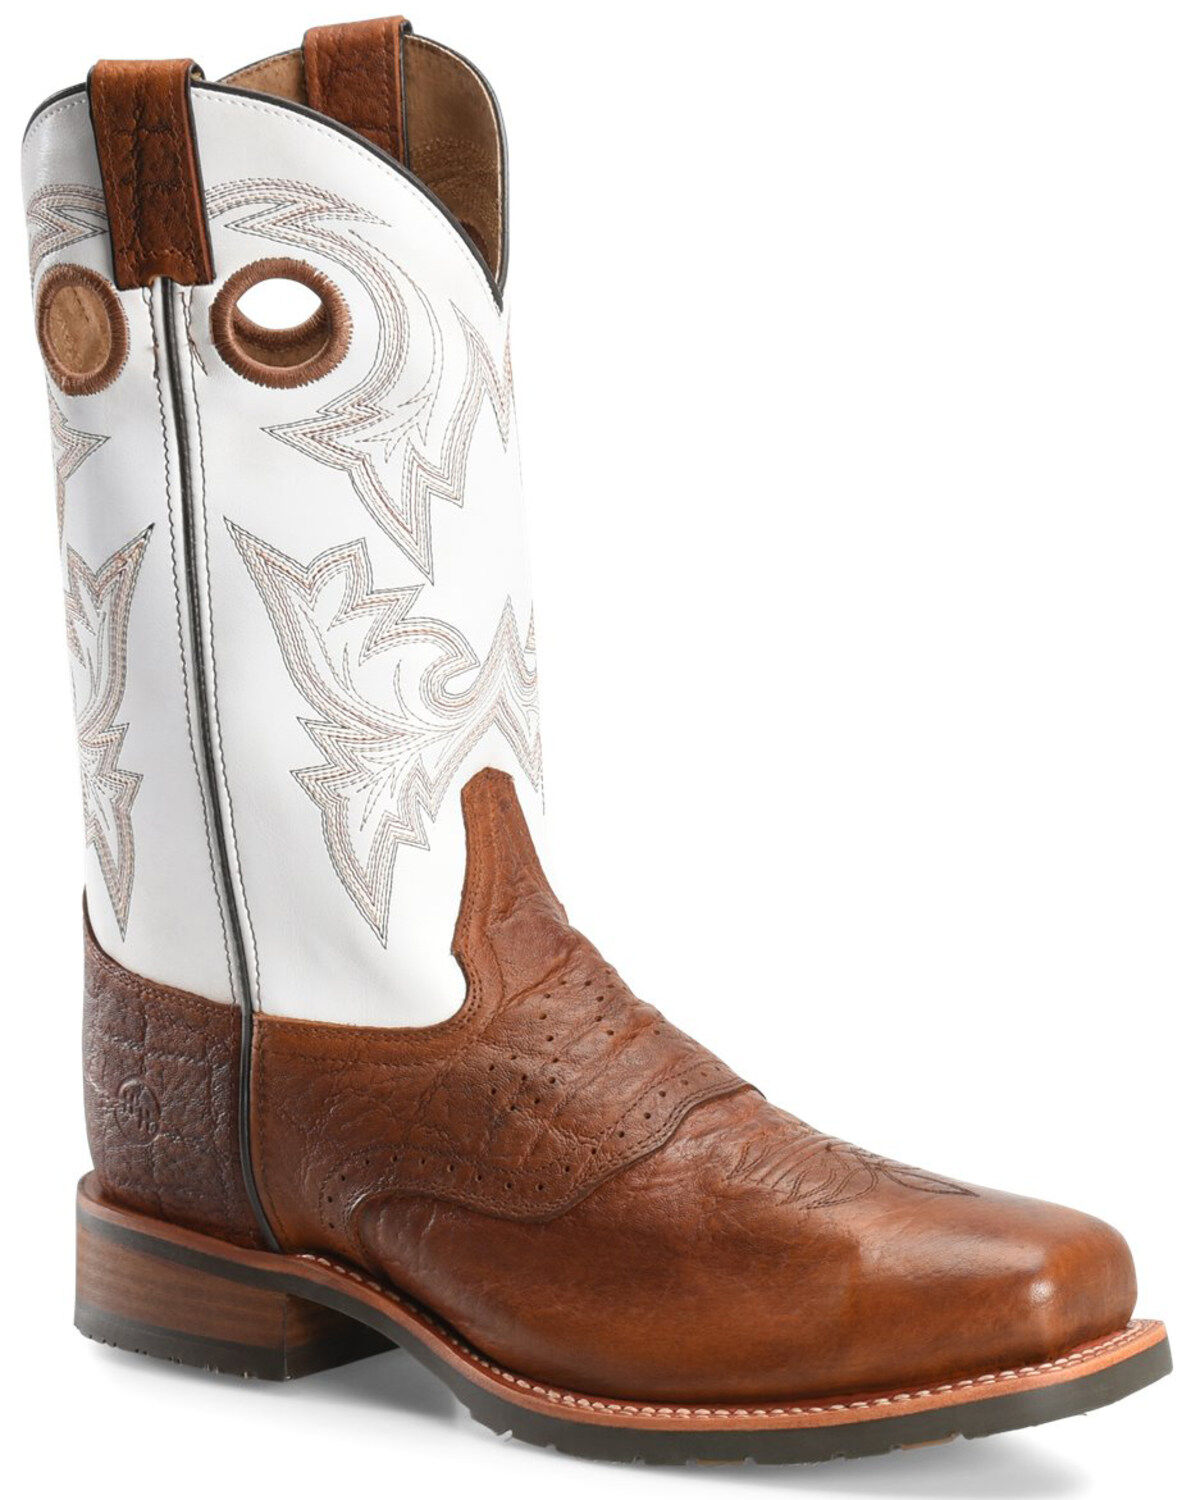 boot barn double h boots